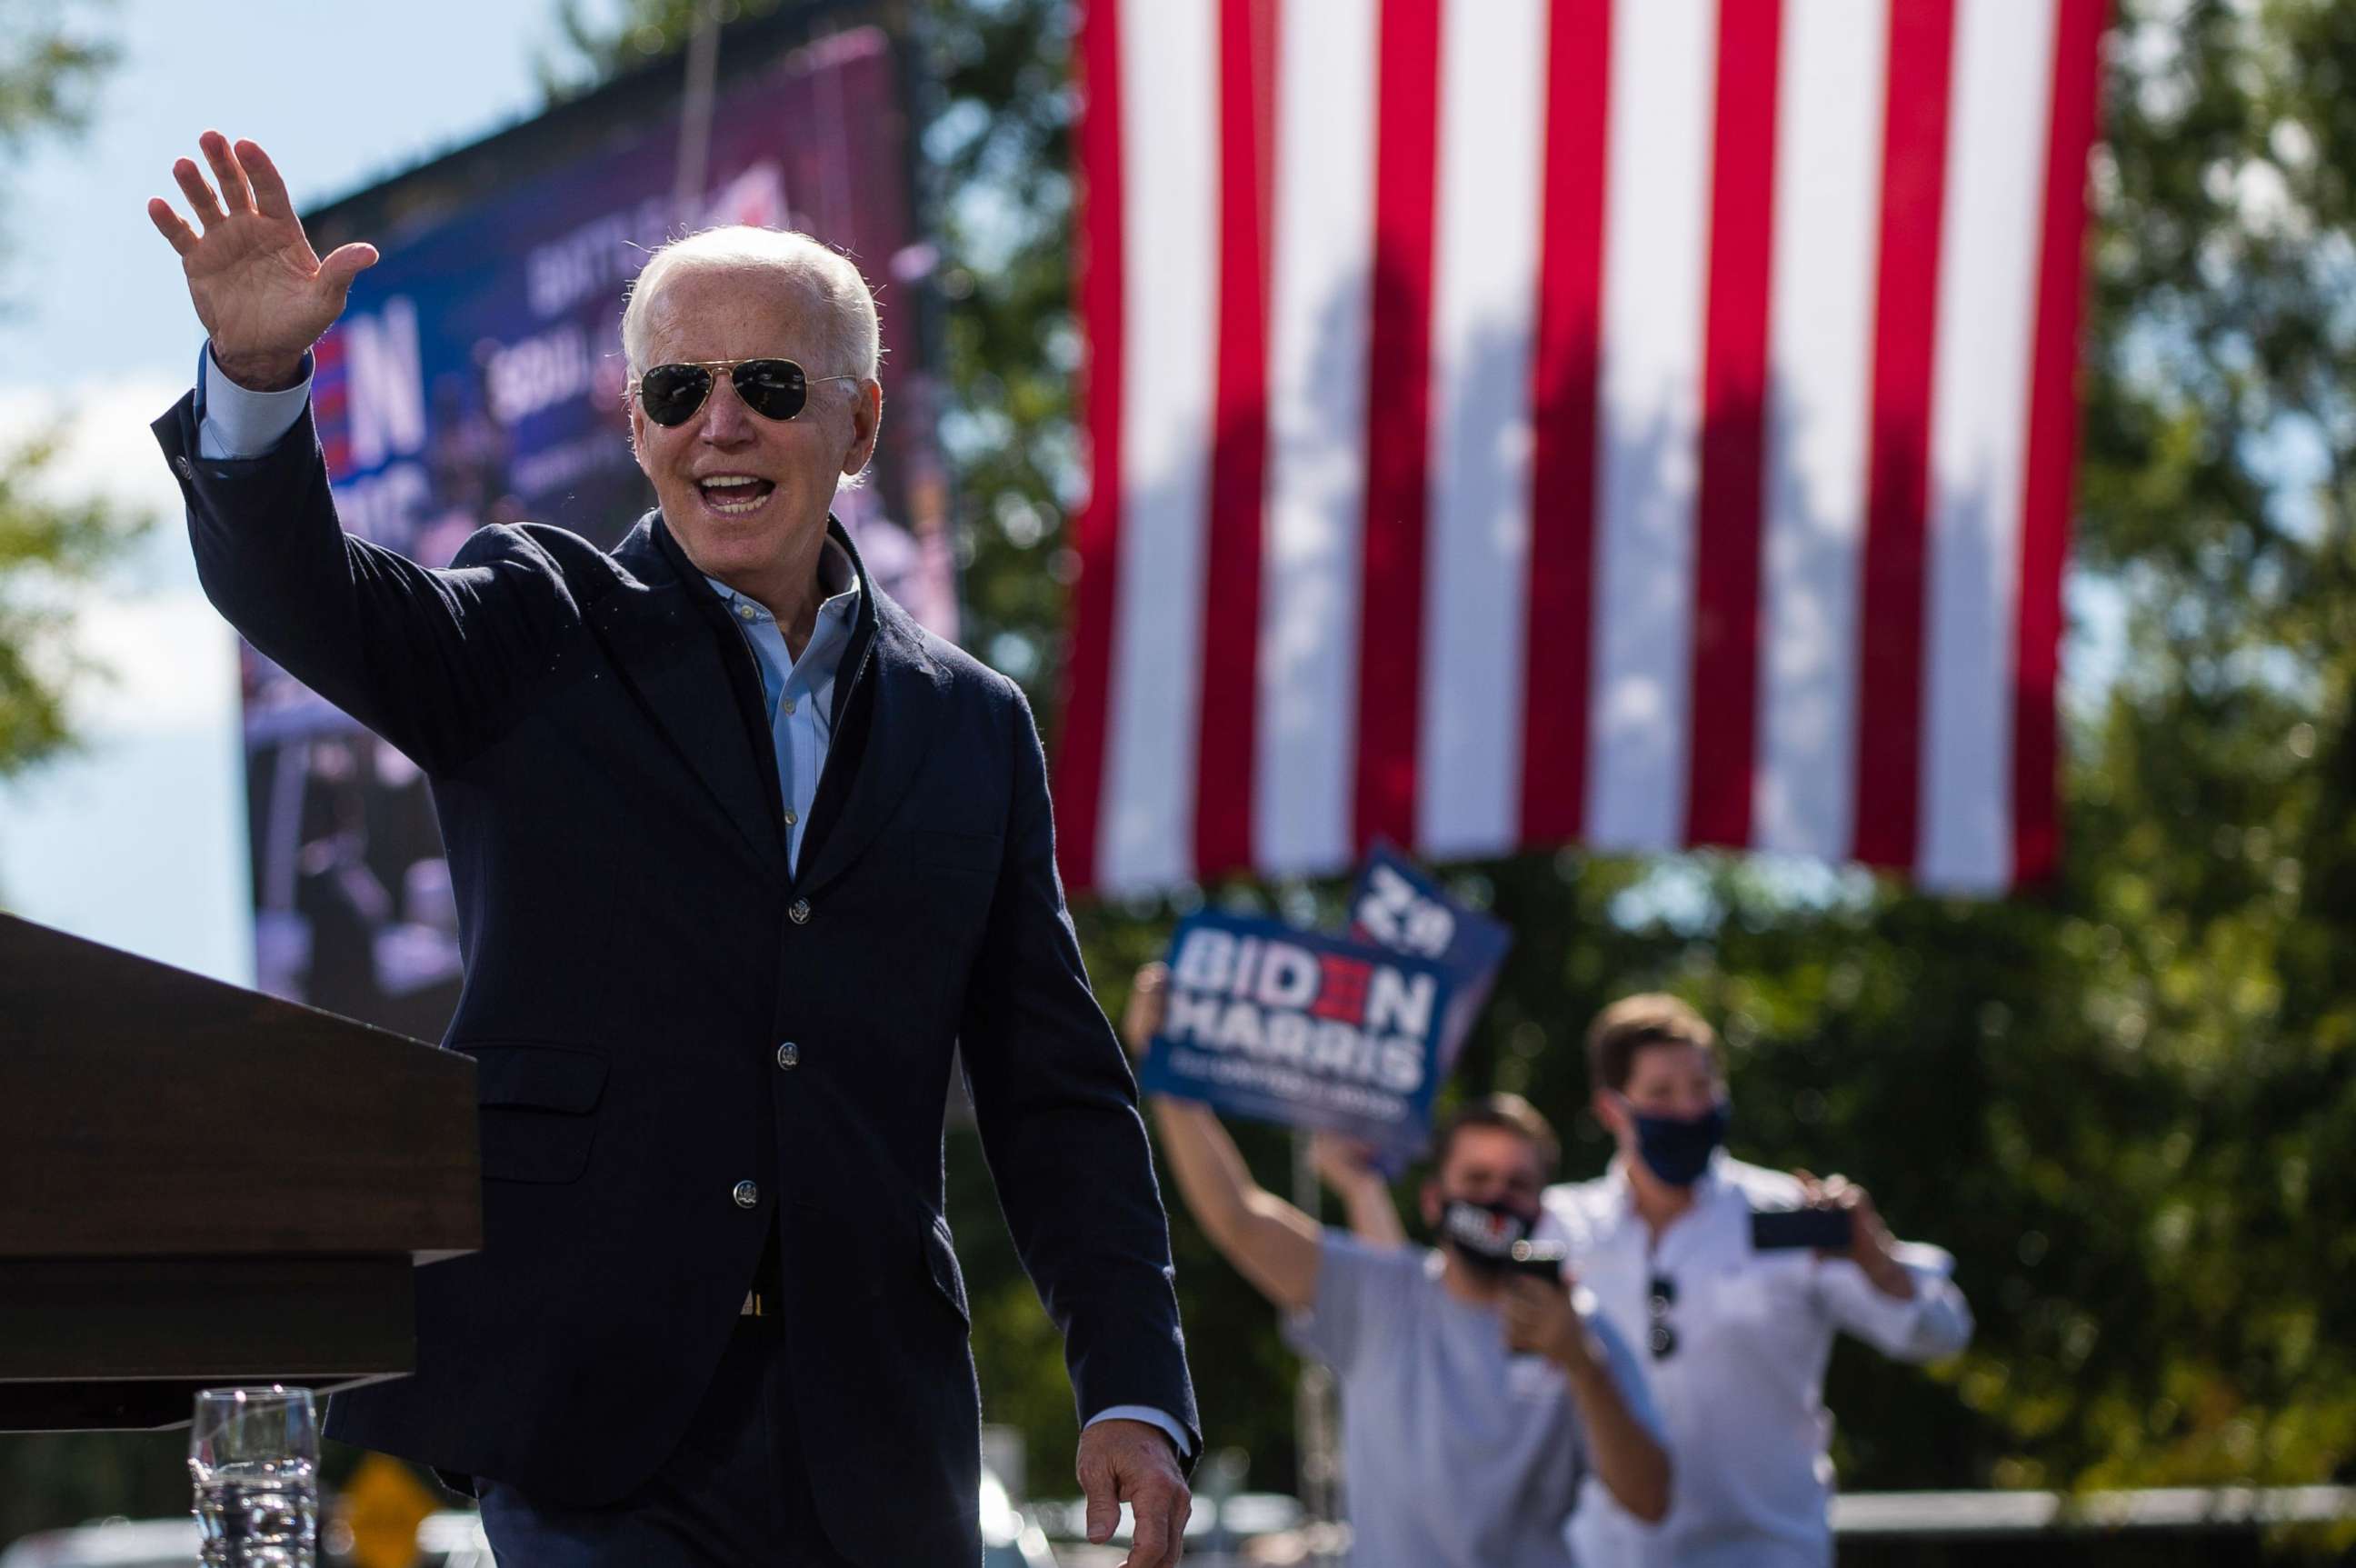 PHOTO: Democratic presidential nominee and former Vice President Joe Biden waves to sympathizers at the end of his speech at the Riverside High School in Durham, North Carolina during a campaign stop, Oct. 18, 2020.